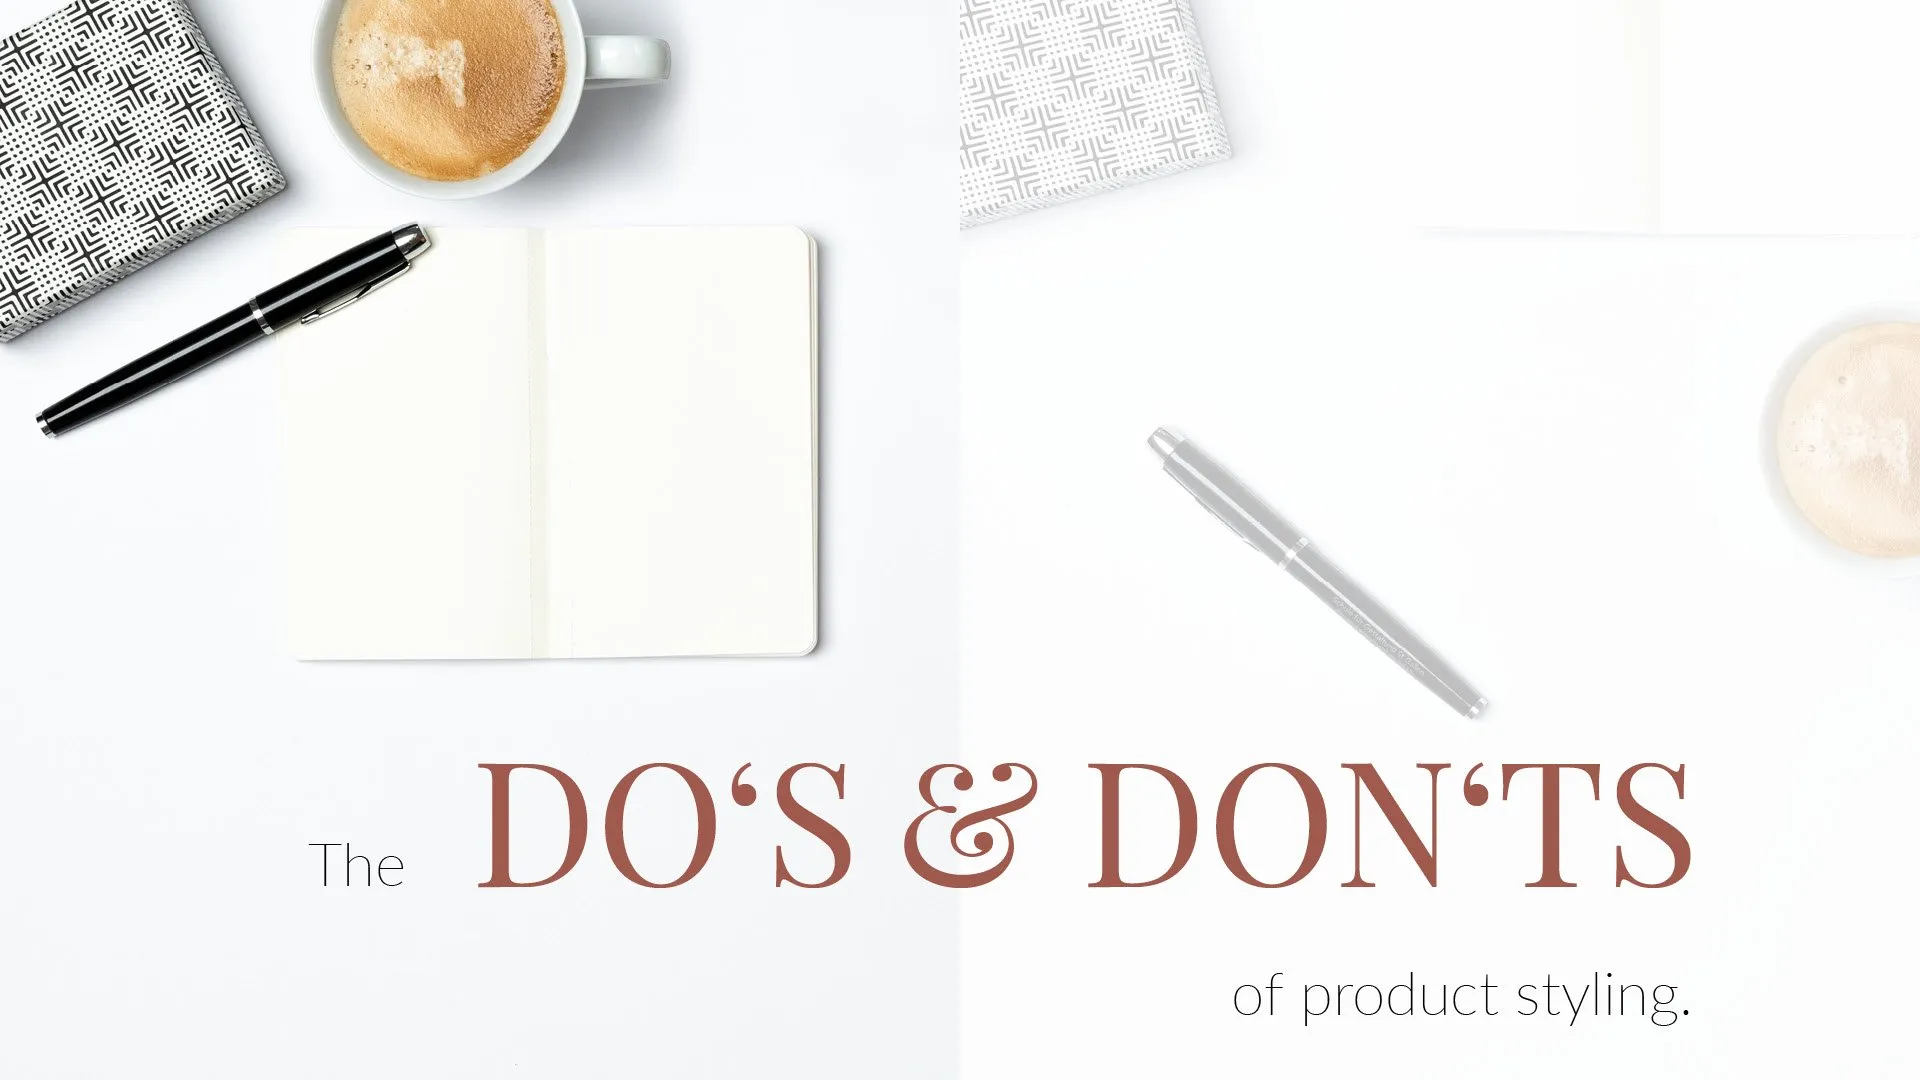 Make Your Products Stand Out: The Dos and Donts of Product Styling